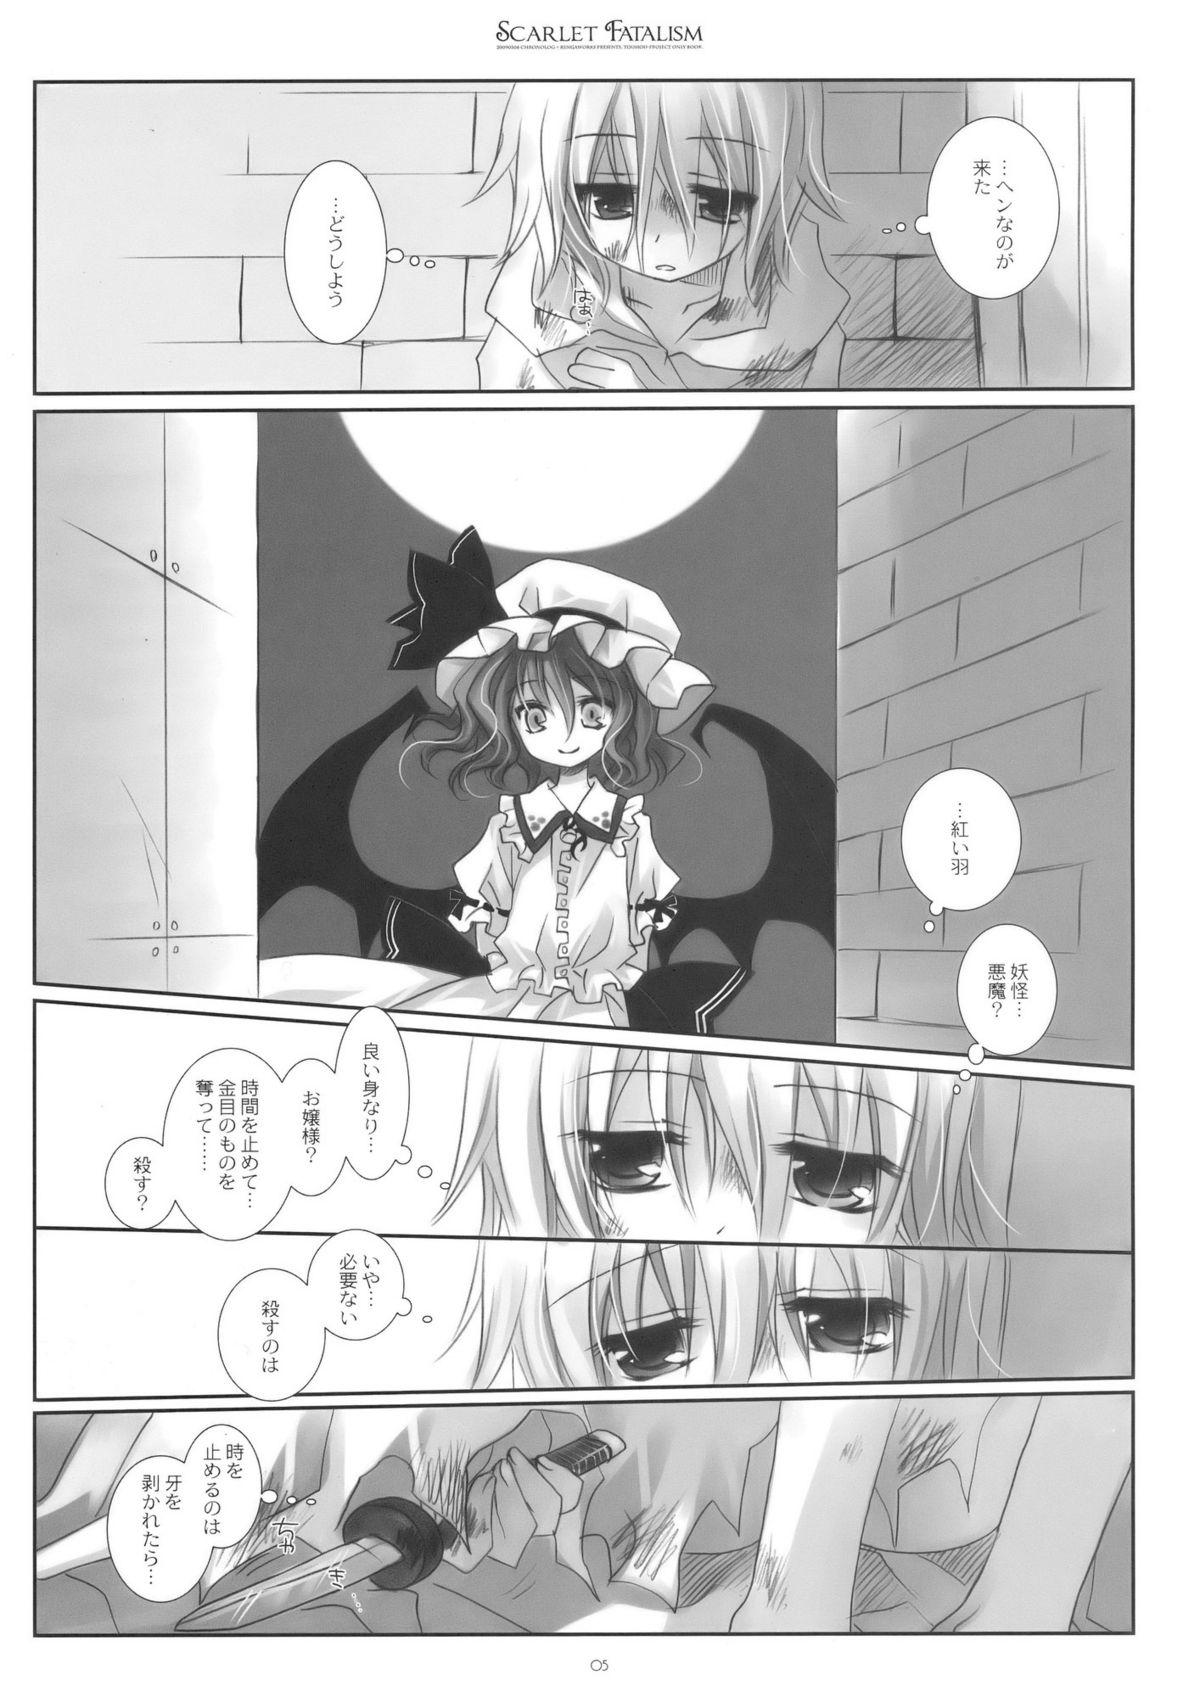 Amature Scarlet Fatalism - Touhou project Fuck Her Hard - Page 5